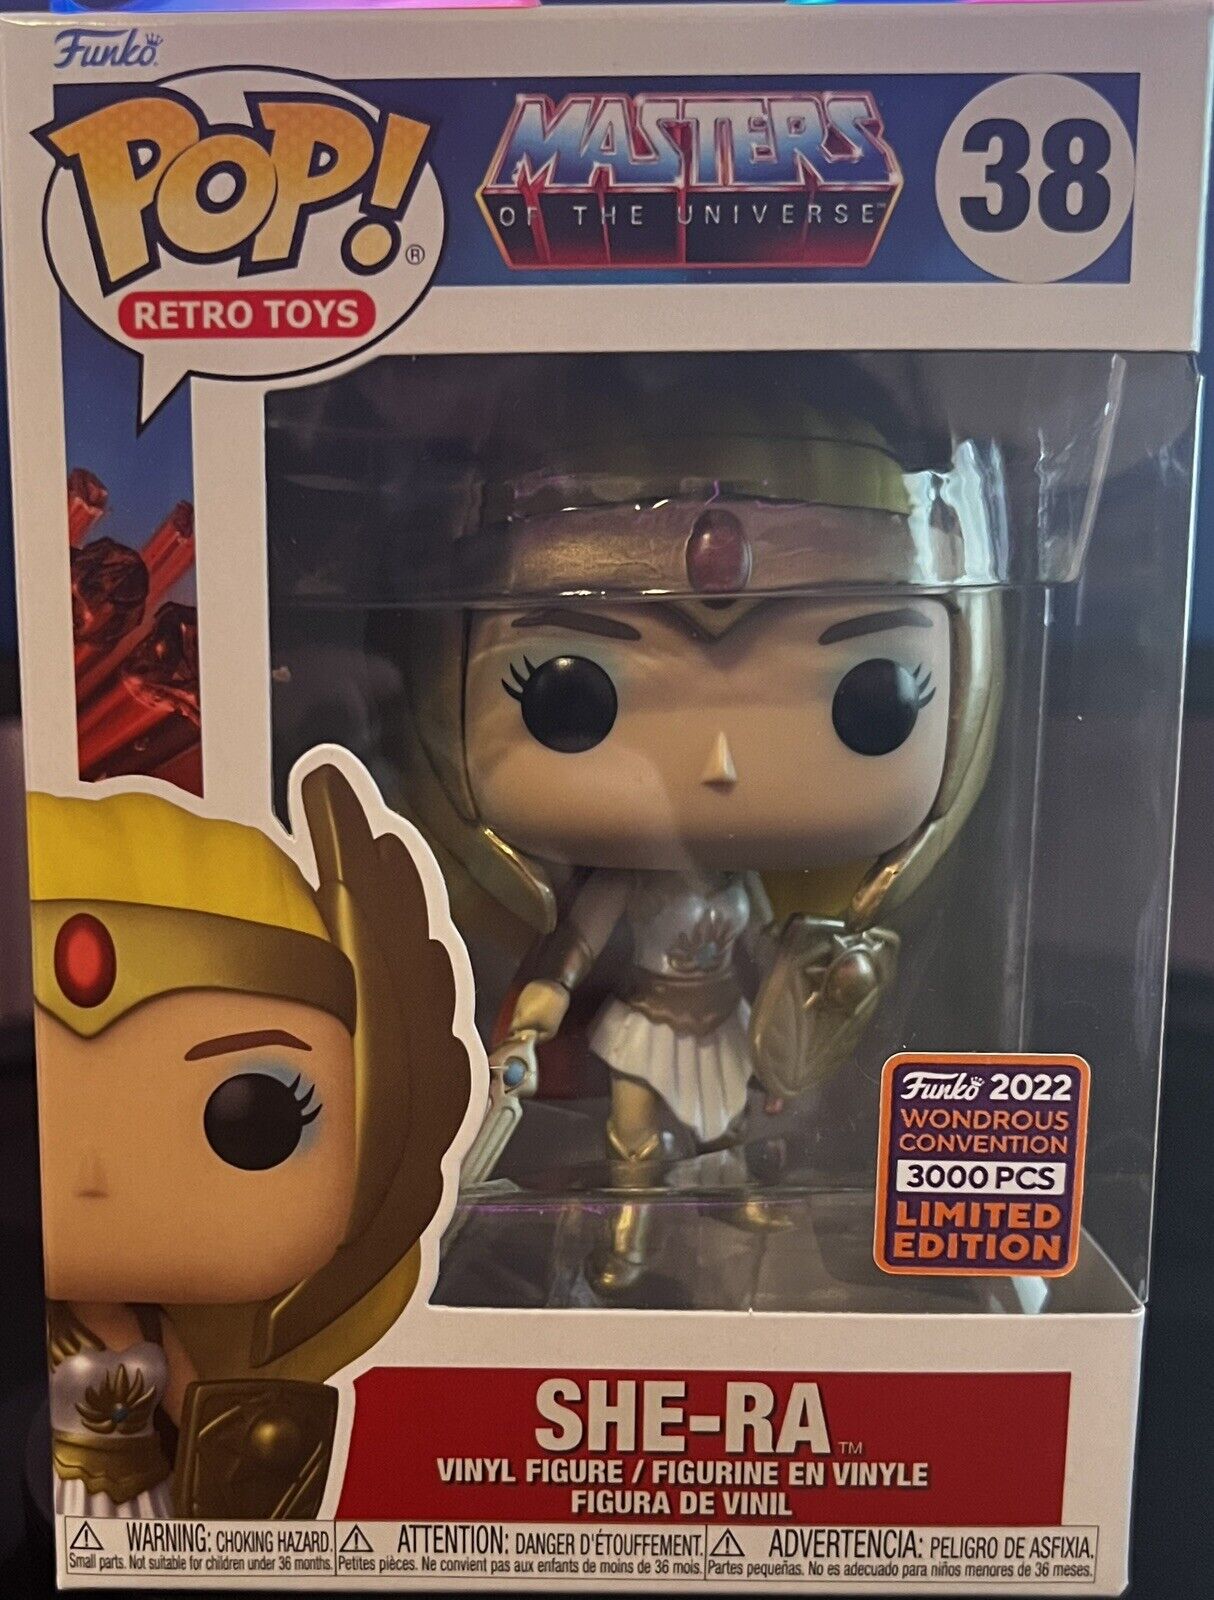 She-Ra #38 Masters of the Universe Limited Edition 3000PCS Funko Pop Retro Toys